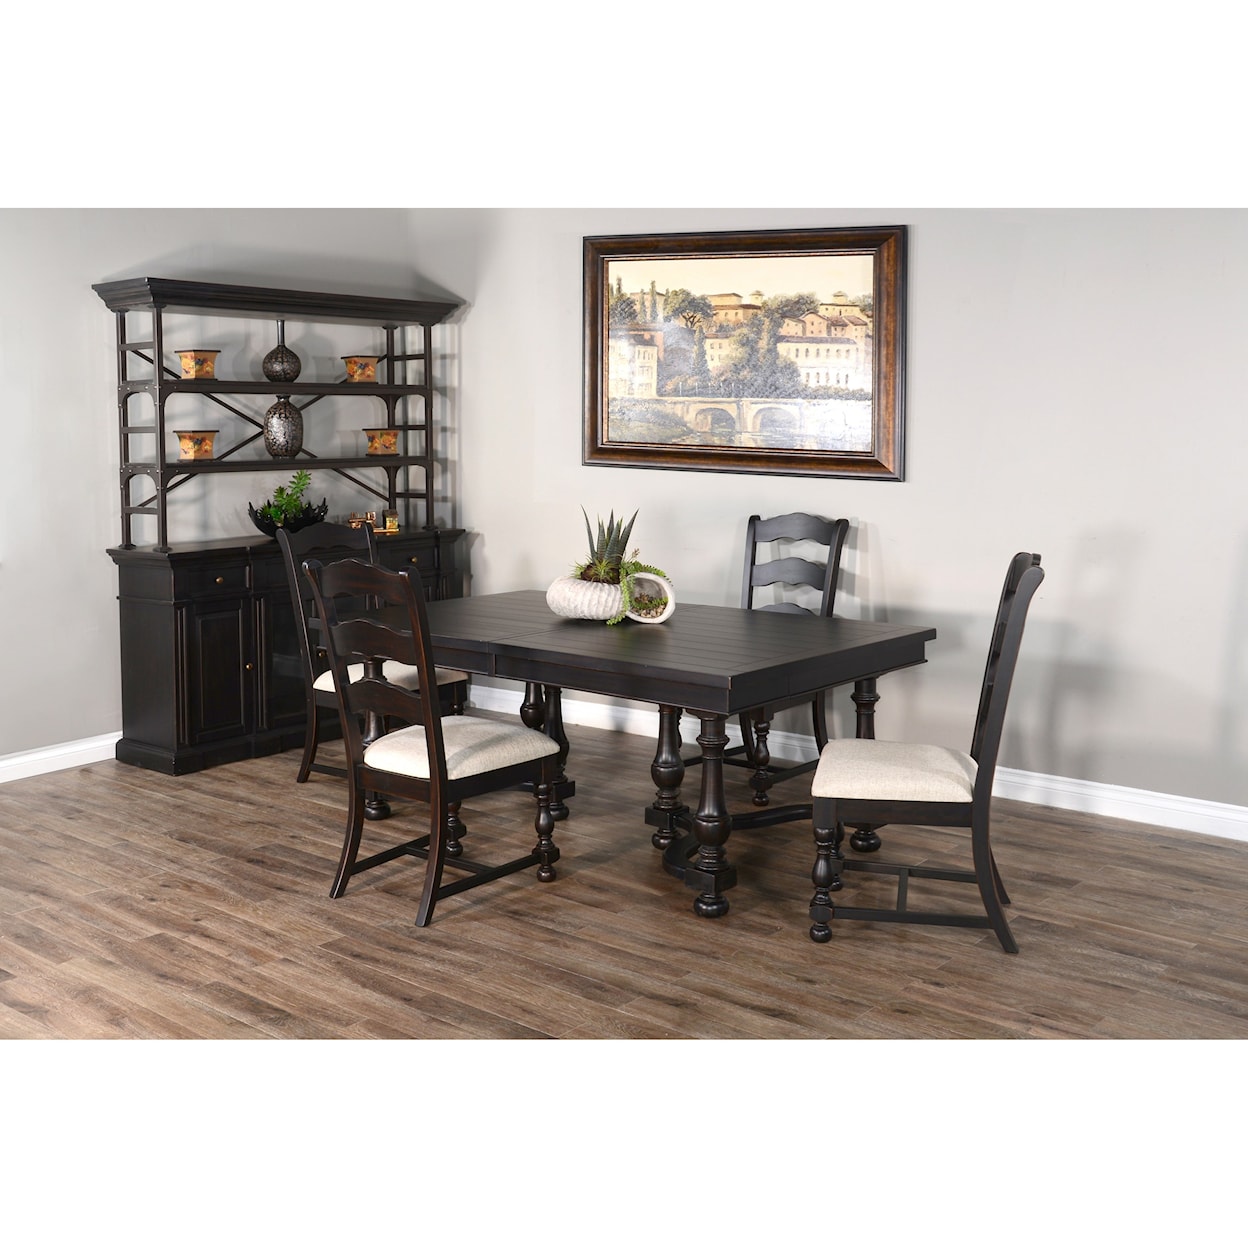 Sunny Designs Scottsdale BW Dining Room Group